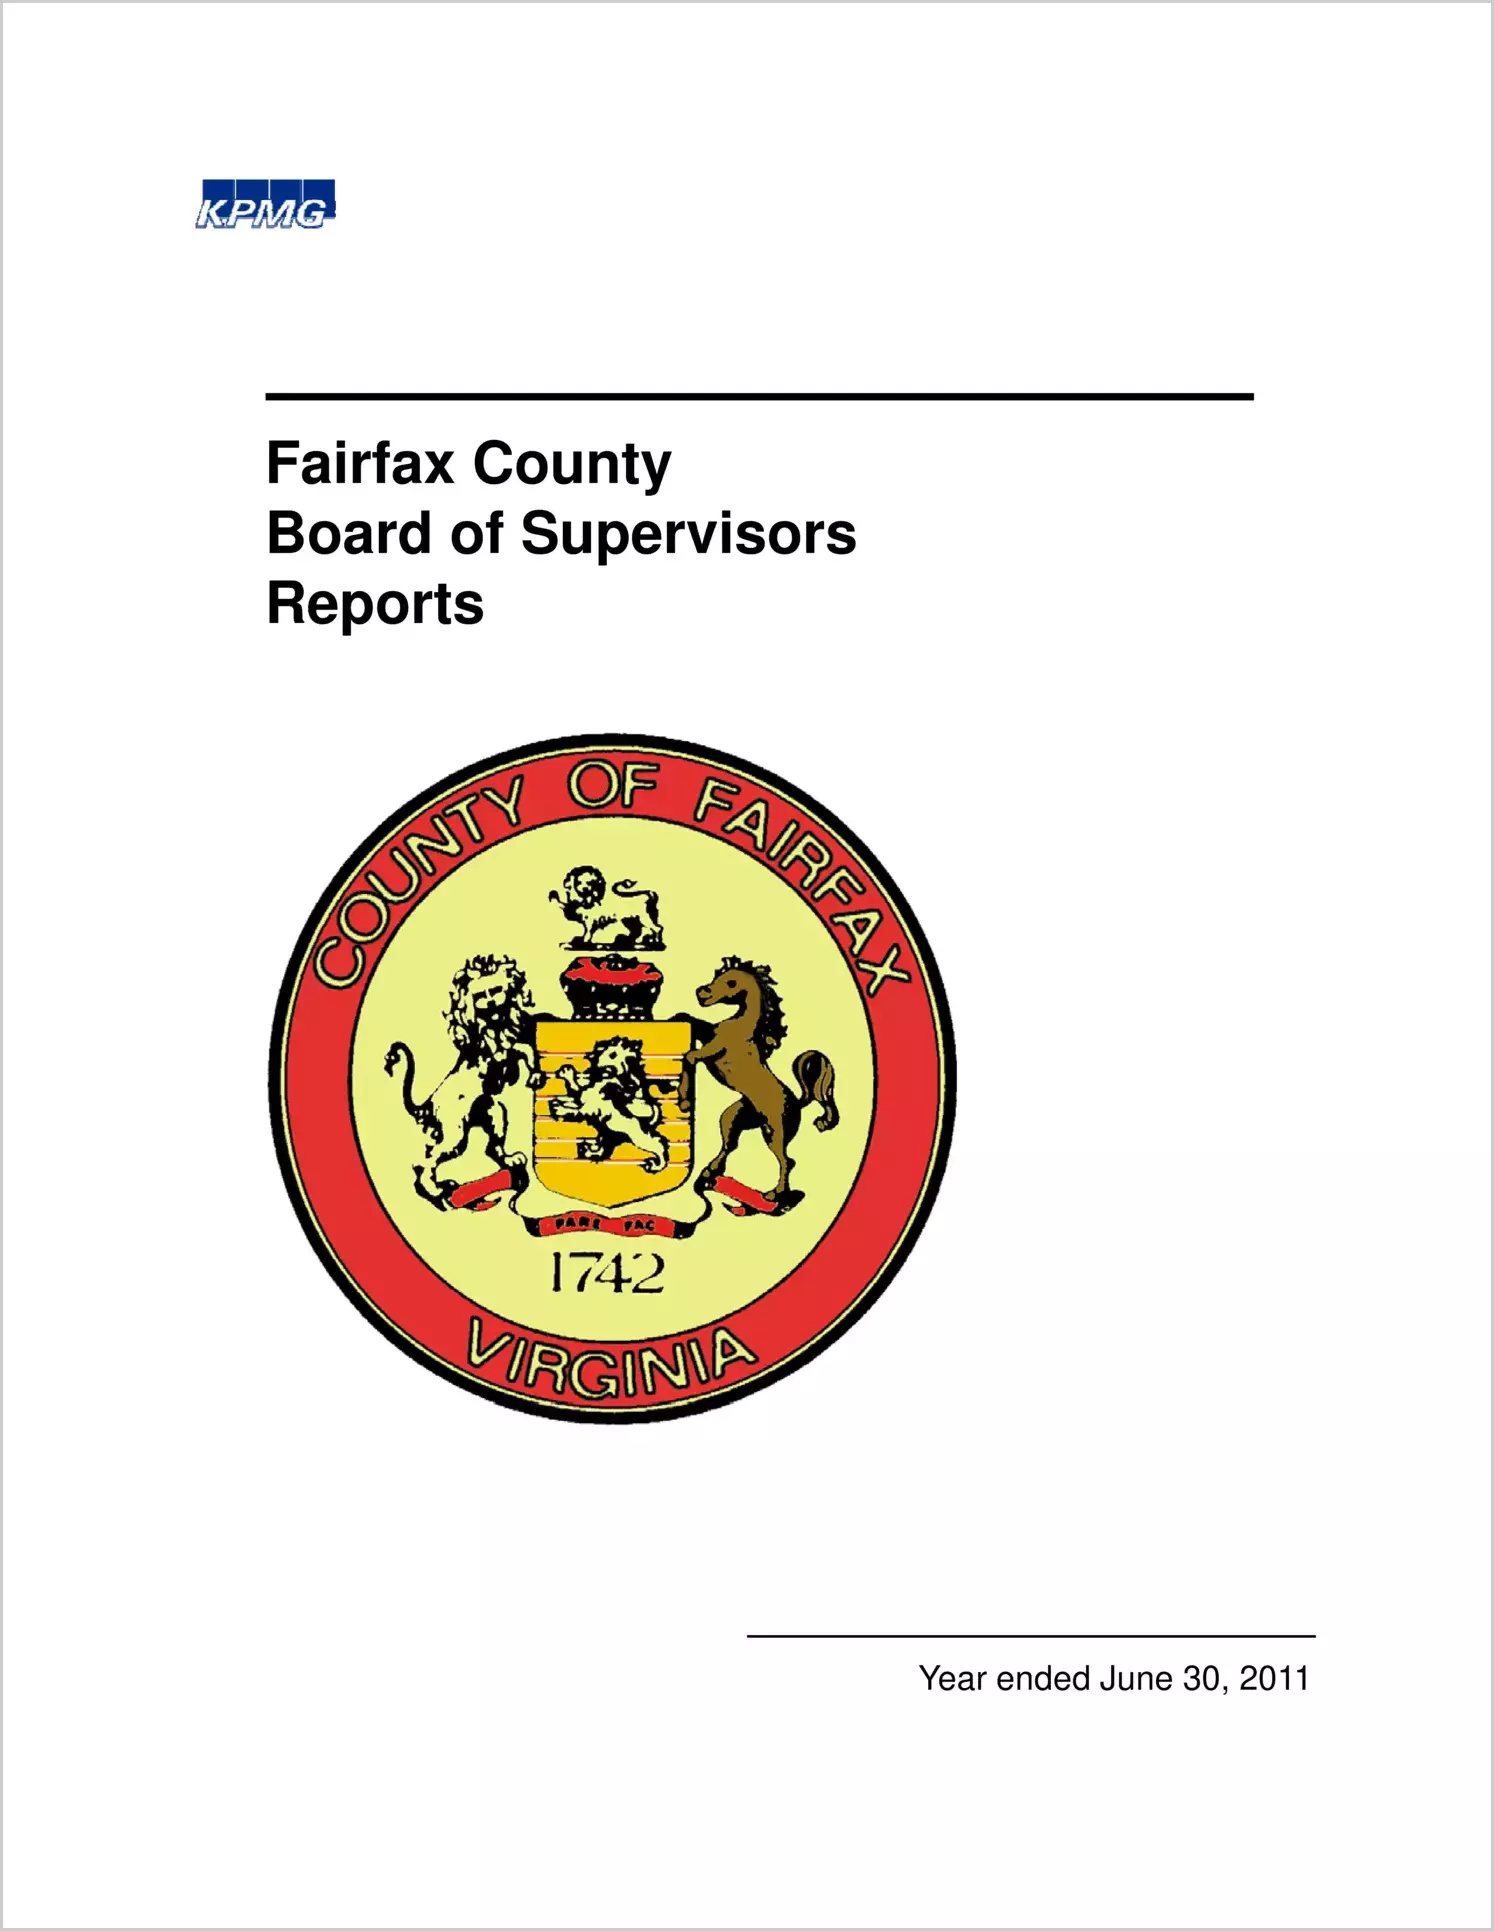 2011 Internal Control and Compliance Report for County of Fairfax